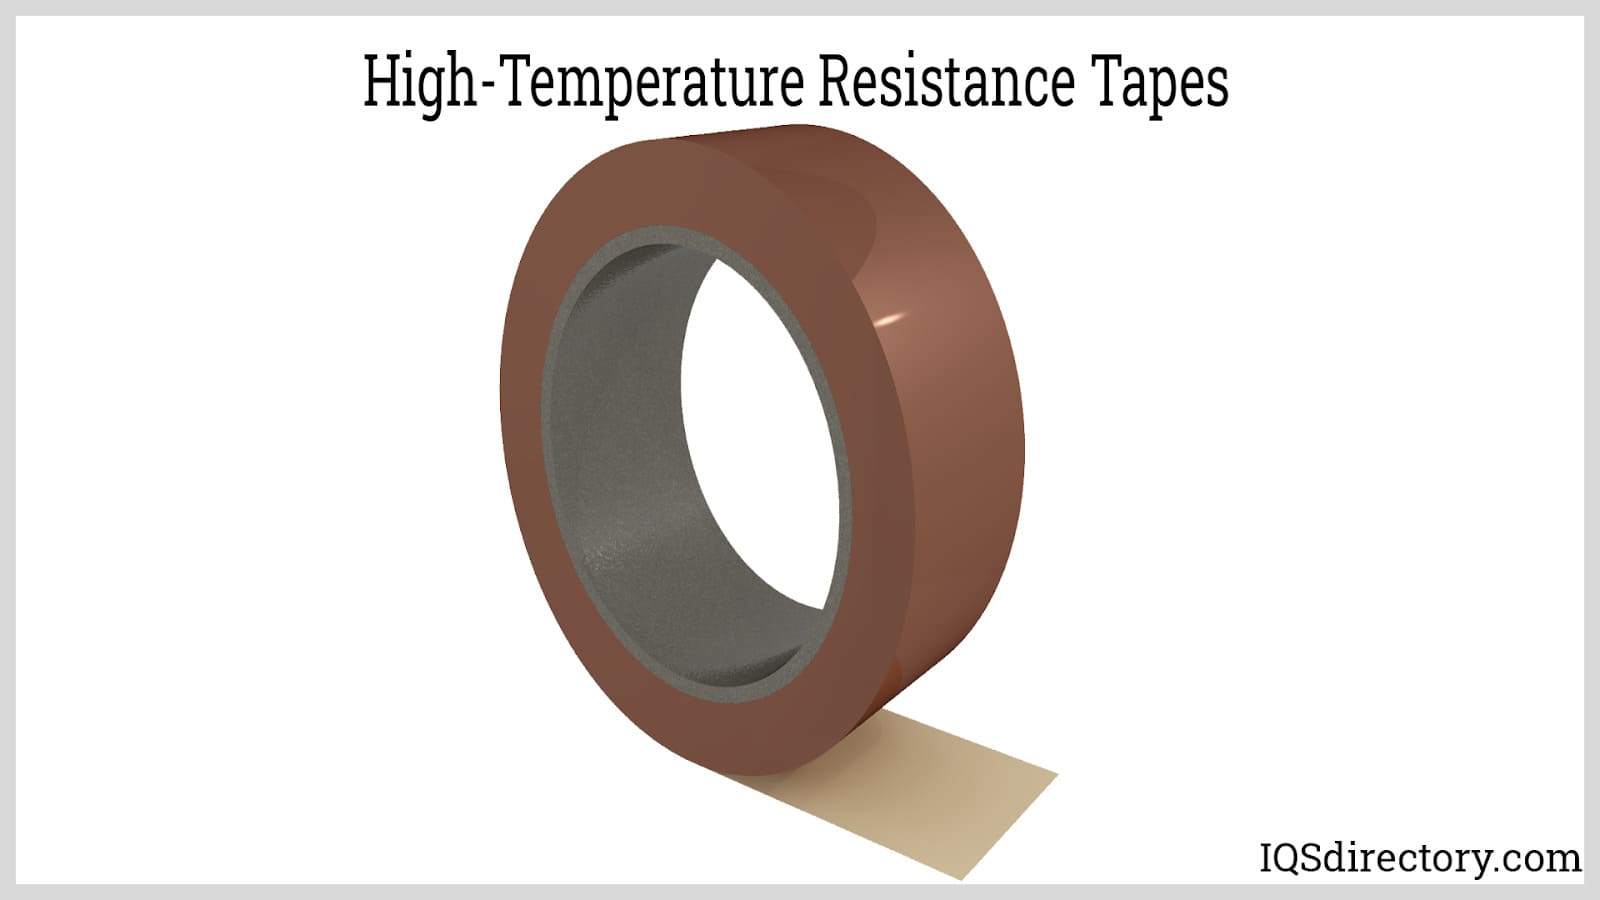 High-Temperature Resistance Tapes